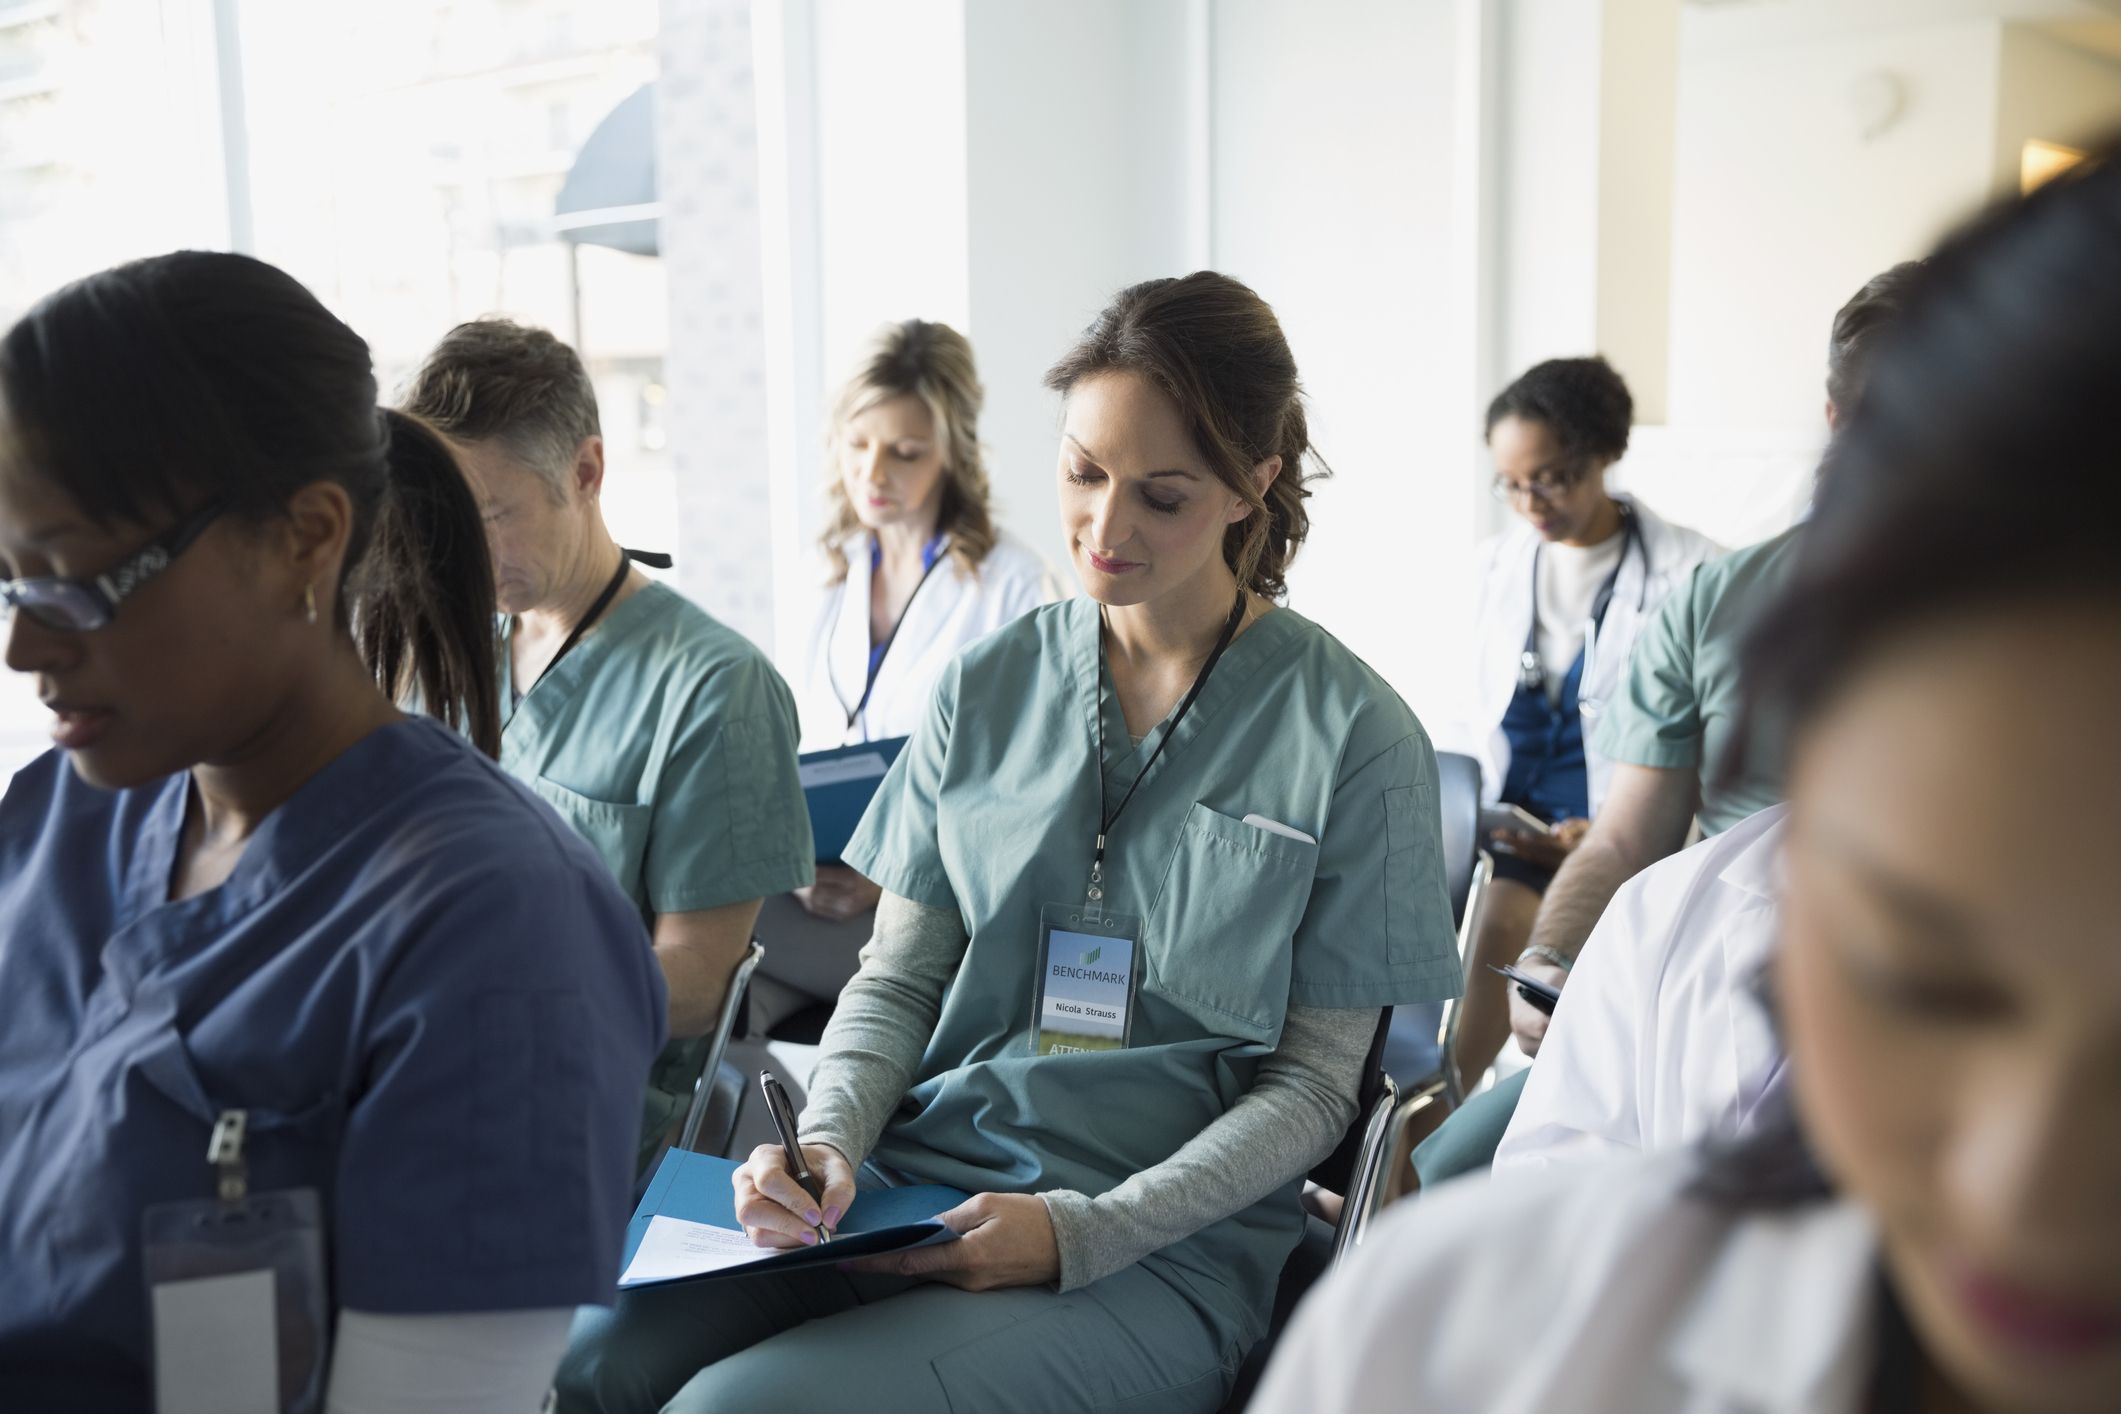 A diverse classroom of healthcare students takes notes at an educational institution.